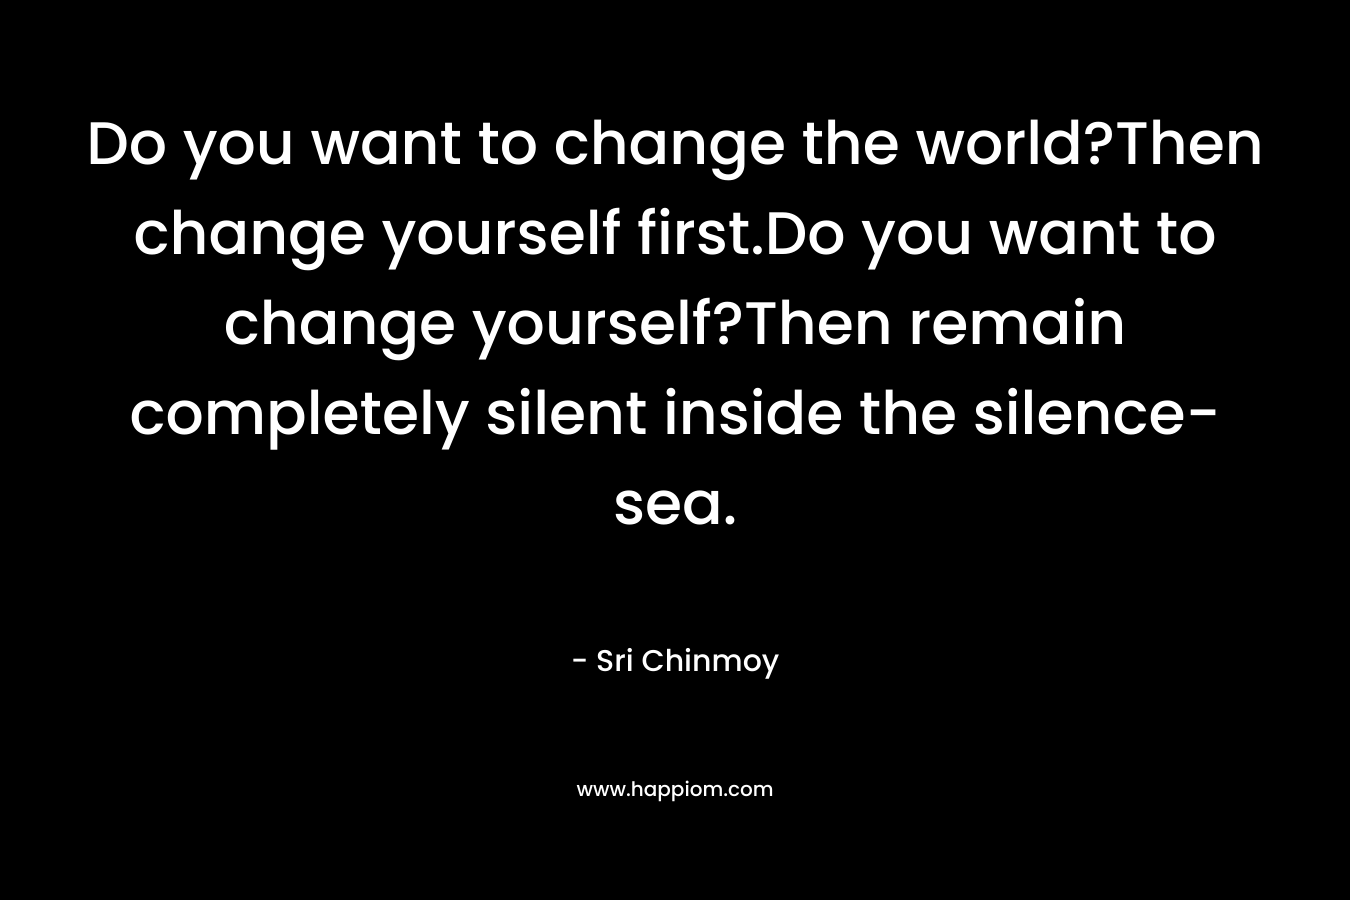 Do you want to change the world?Then change yourself first.Do you want to change yourself?Then remain completely silent inside the silence-sea.